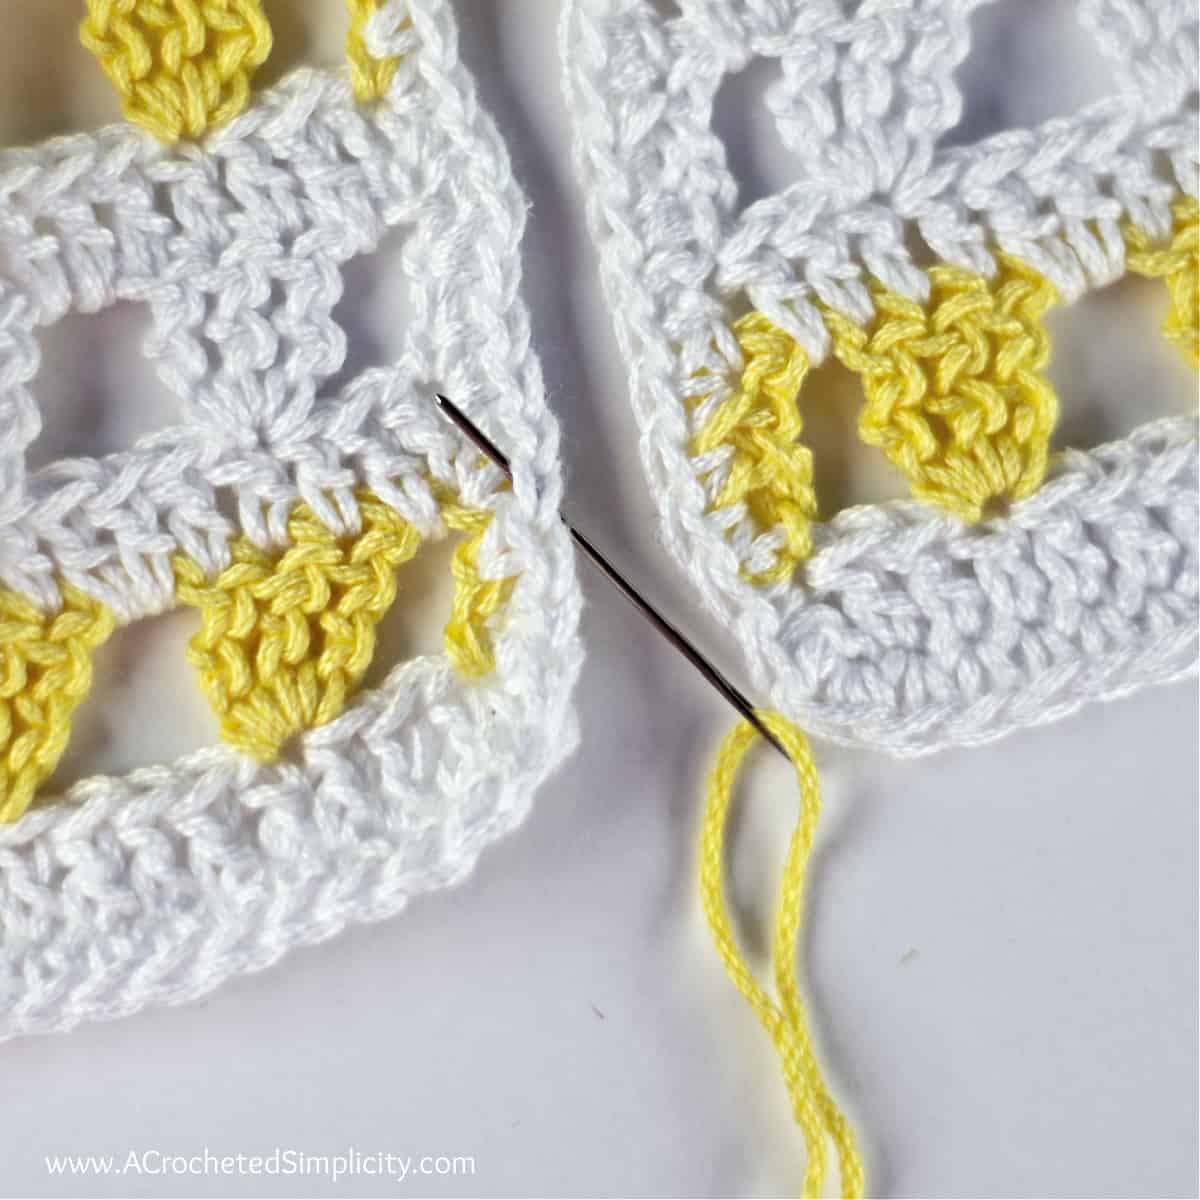 A needle with yellow yarn is being inserted into the crochet piece on the left, from bottom to top.